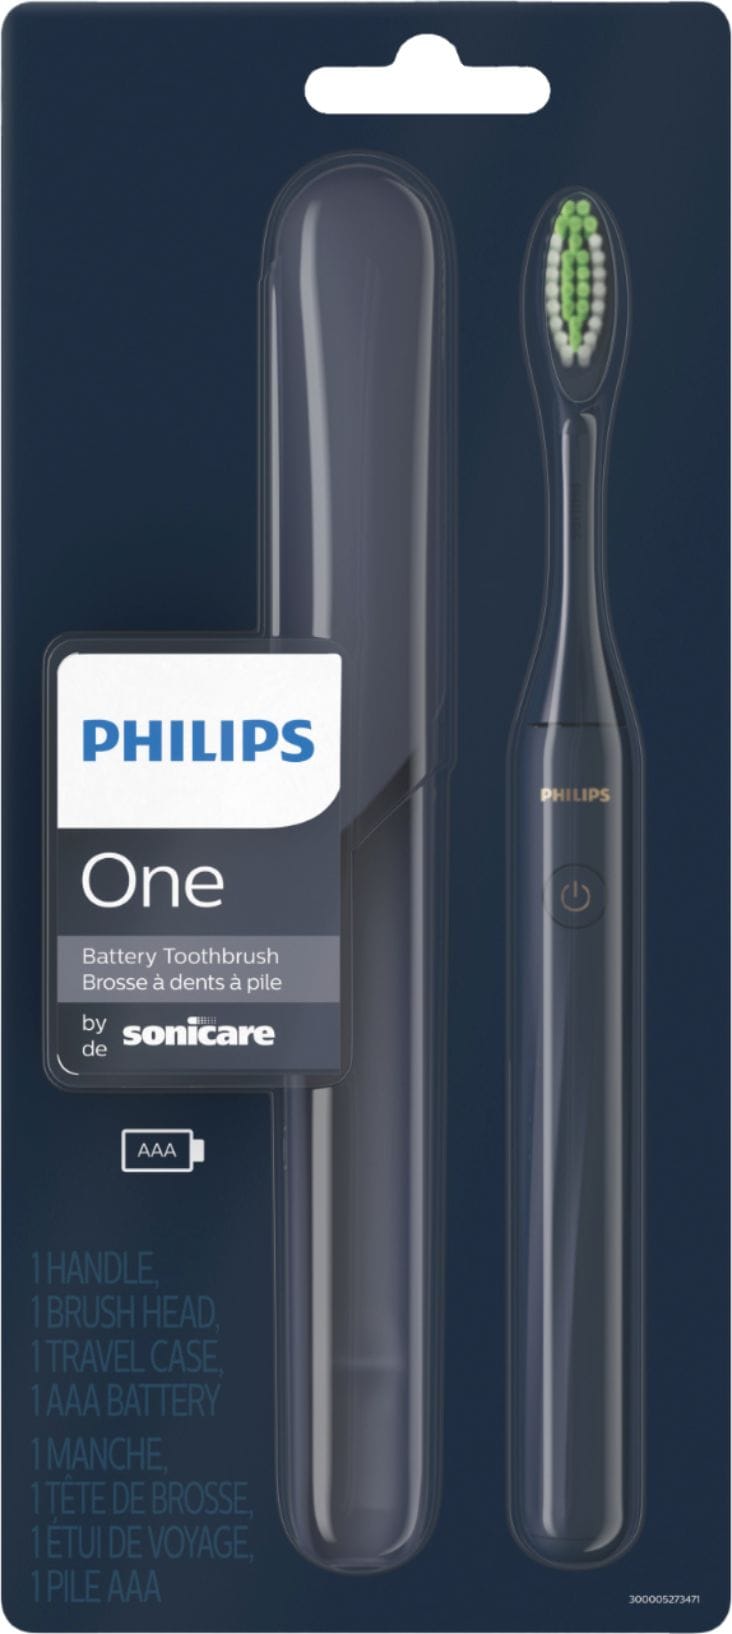 Philips Sonicare - Philips One by Sonicare Battery Toothbrush - Midnight Navy Blue_0